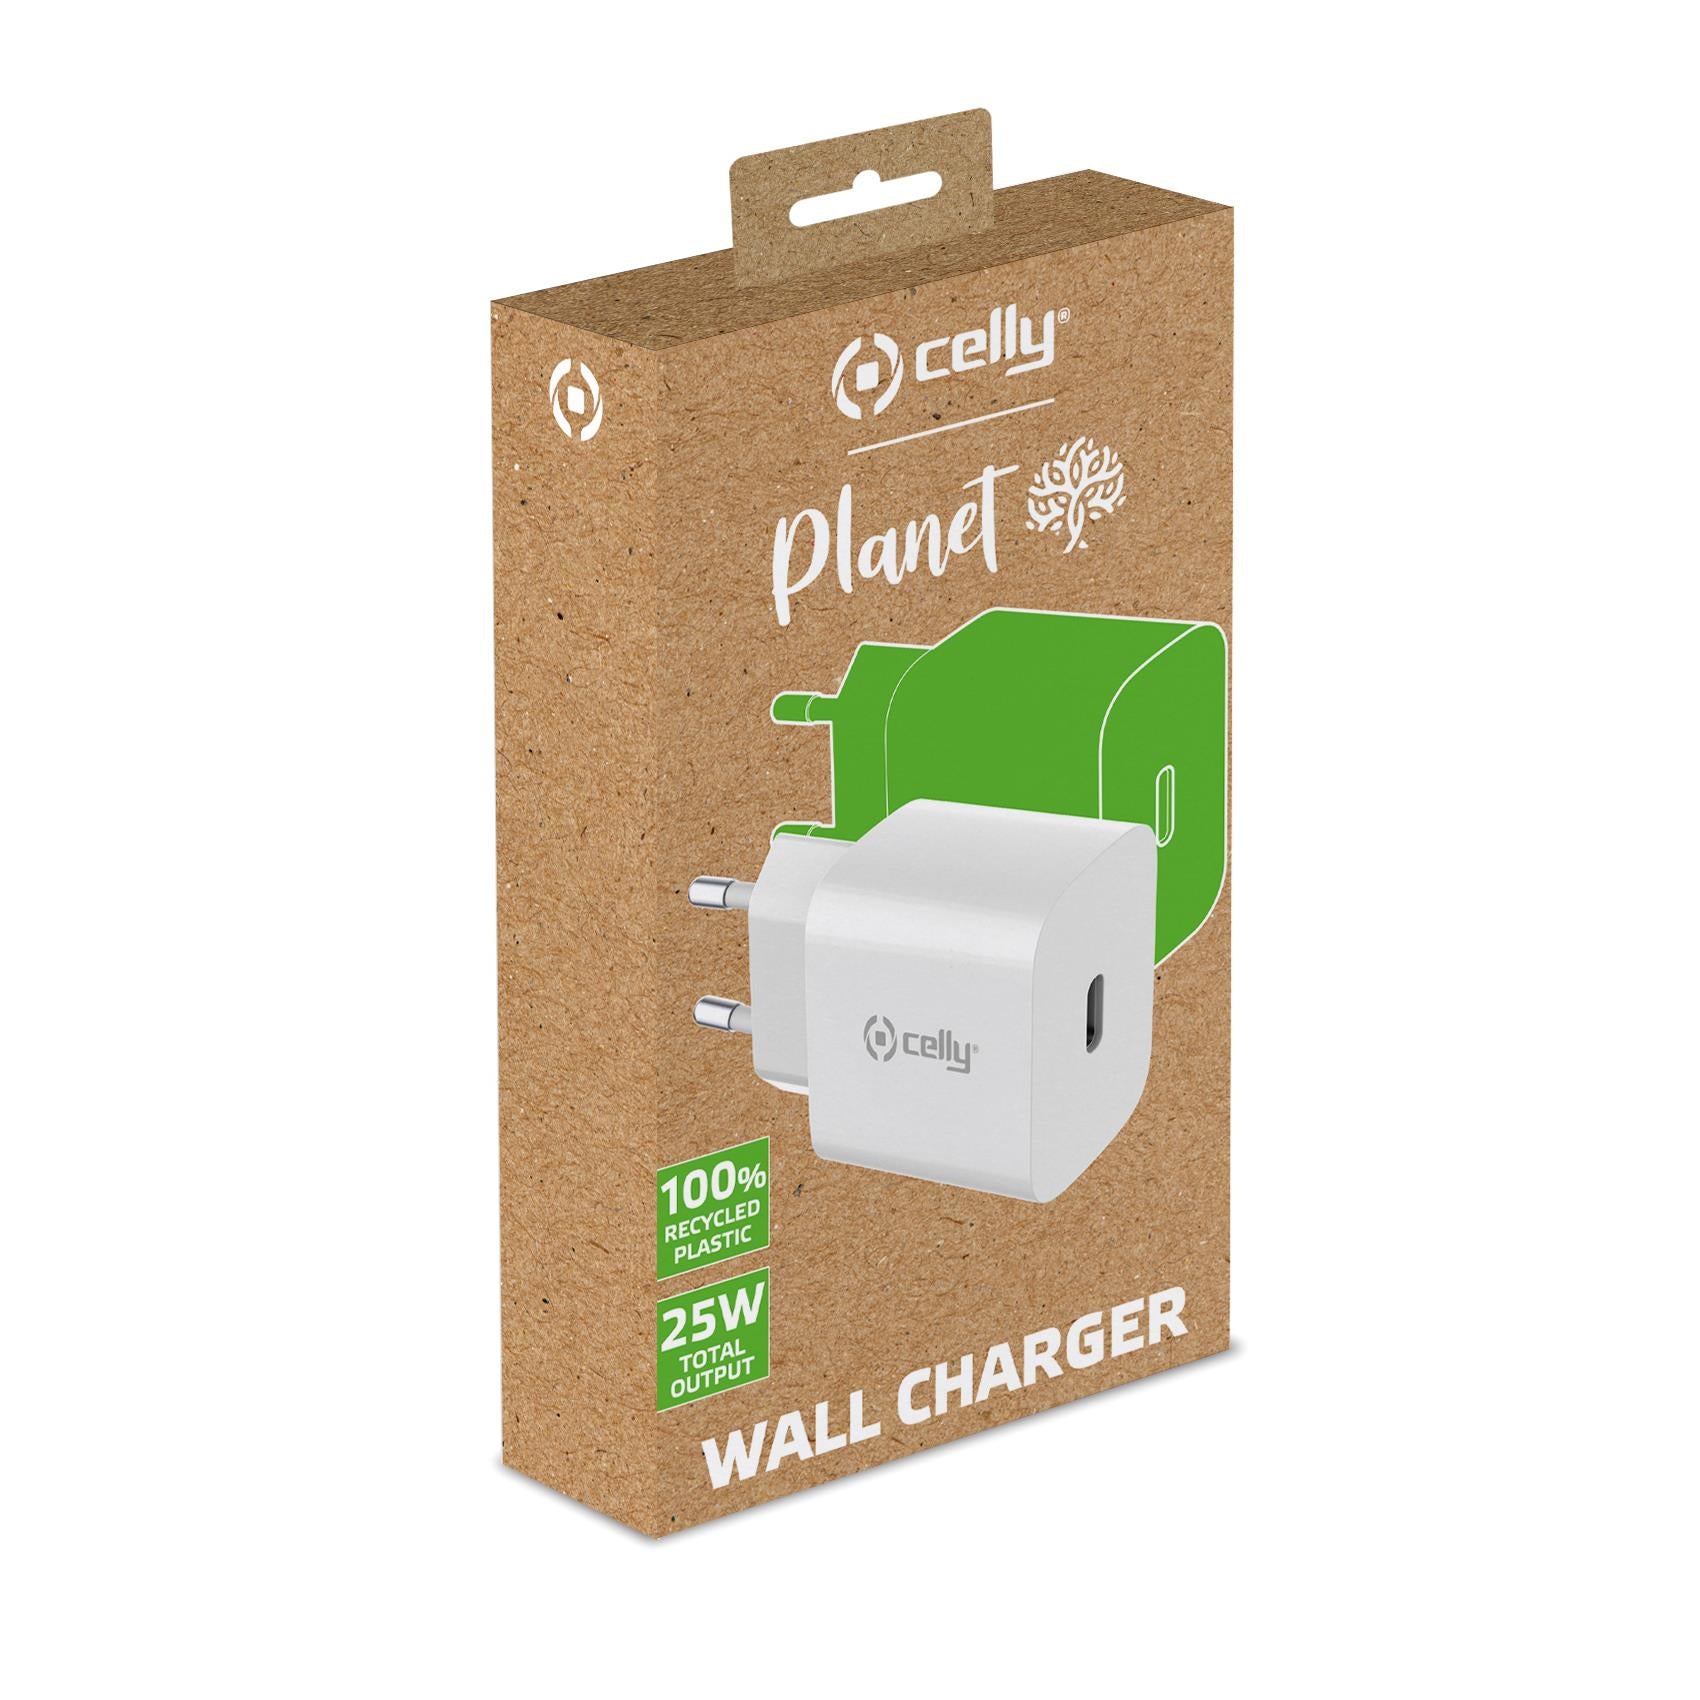 Celly GRSTC1USBC25WWH - Wall charger up to 25W made with 100% recycled plastic 25W